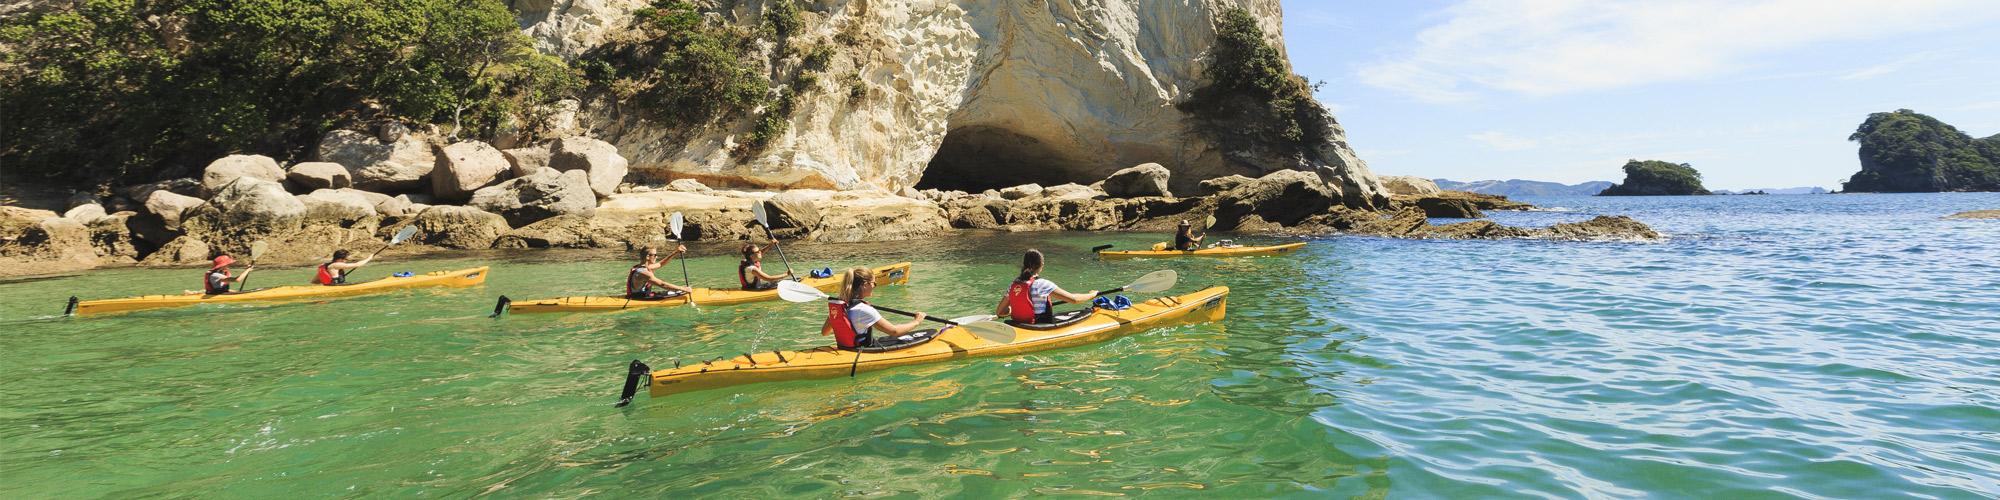 Kayaking to Cathedral Cove by Adam Bryce